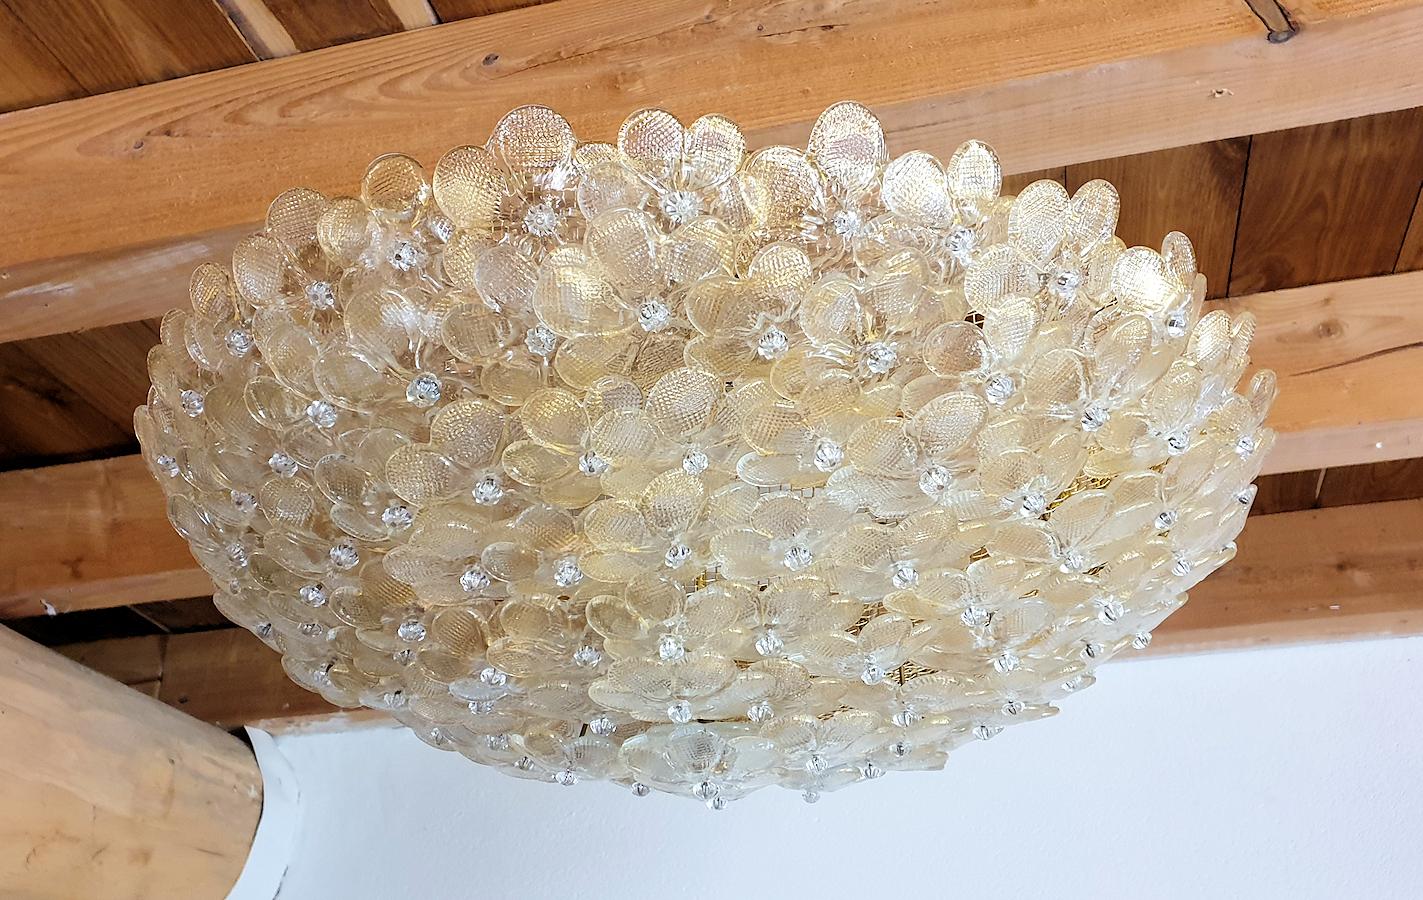 Large round Mid-Century Modern Murano glass flower chandelier, or flushmount ceiling light,
by Barovier & Toso, Italy, late 1970s.
The Murano glass flowers and clear with some gold flakes.
The frame is brass.
6-light, candelabra base sockets,